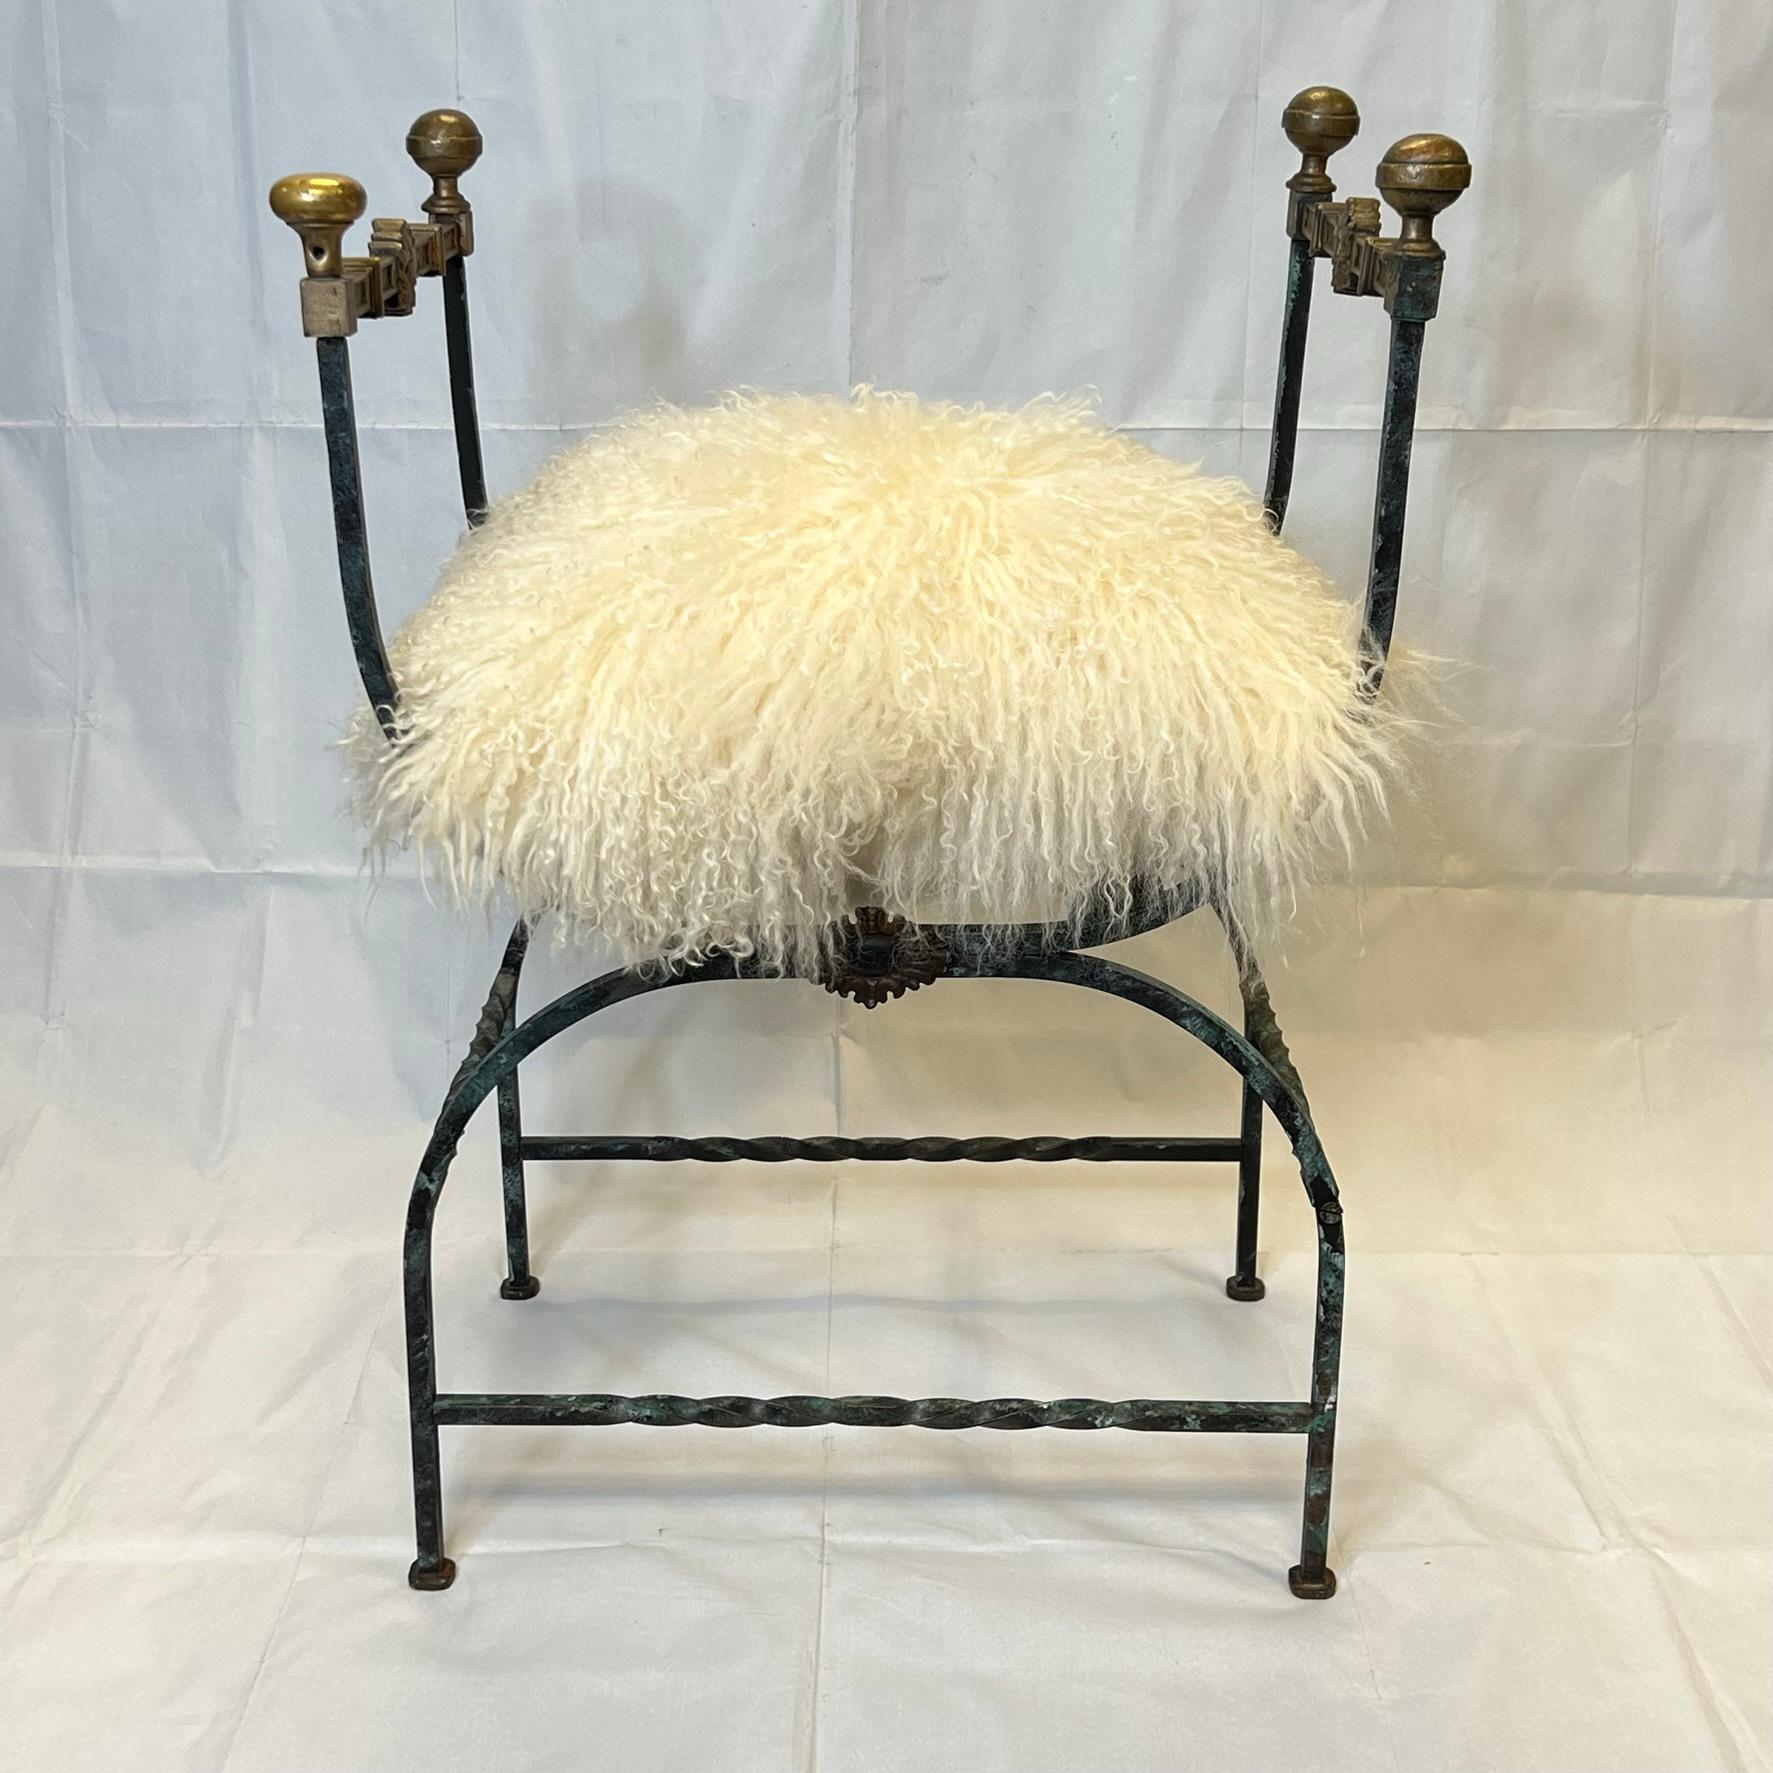 Wrought Iron Bench in Renaissance Style with Sheepskin Seat Cushion, possibly by Oscar Bach.